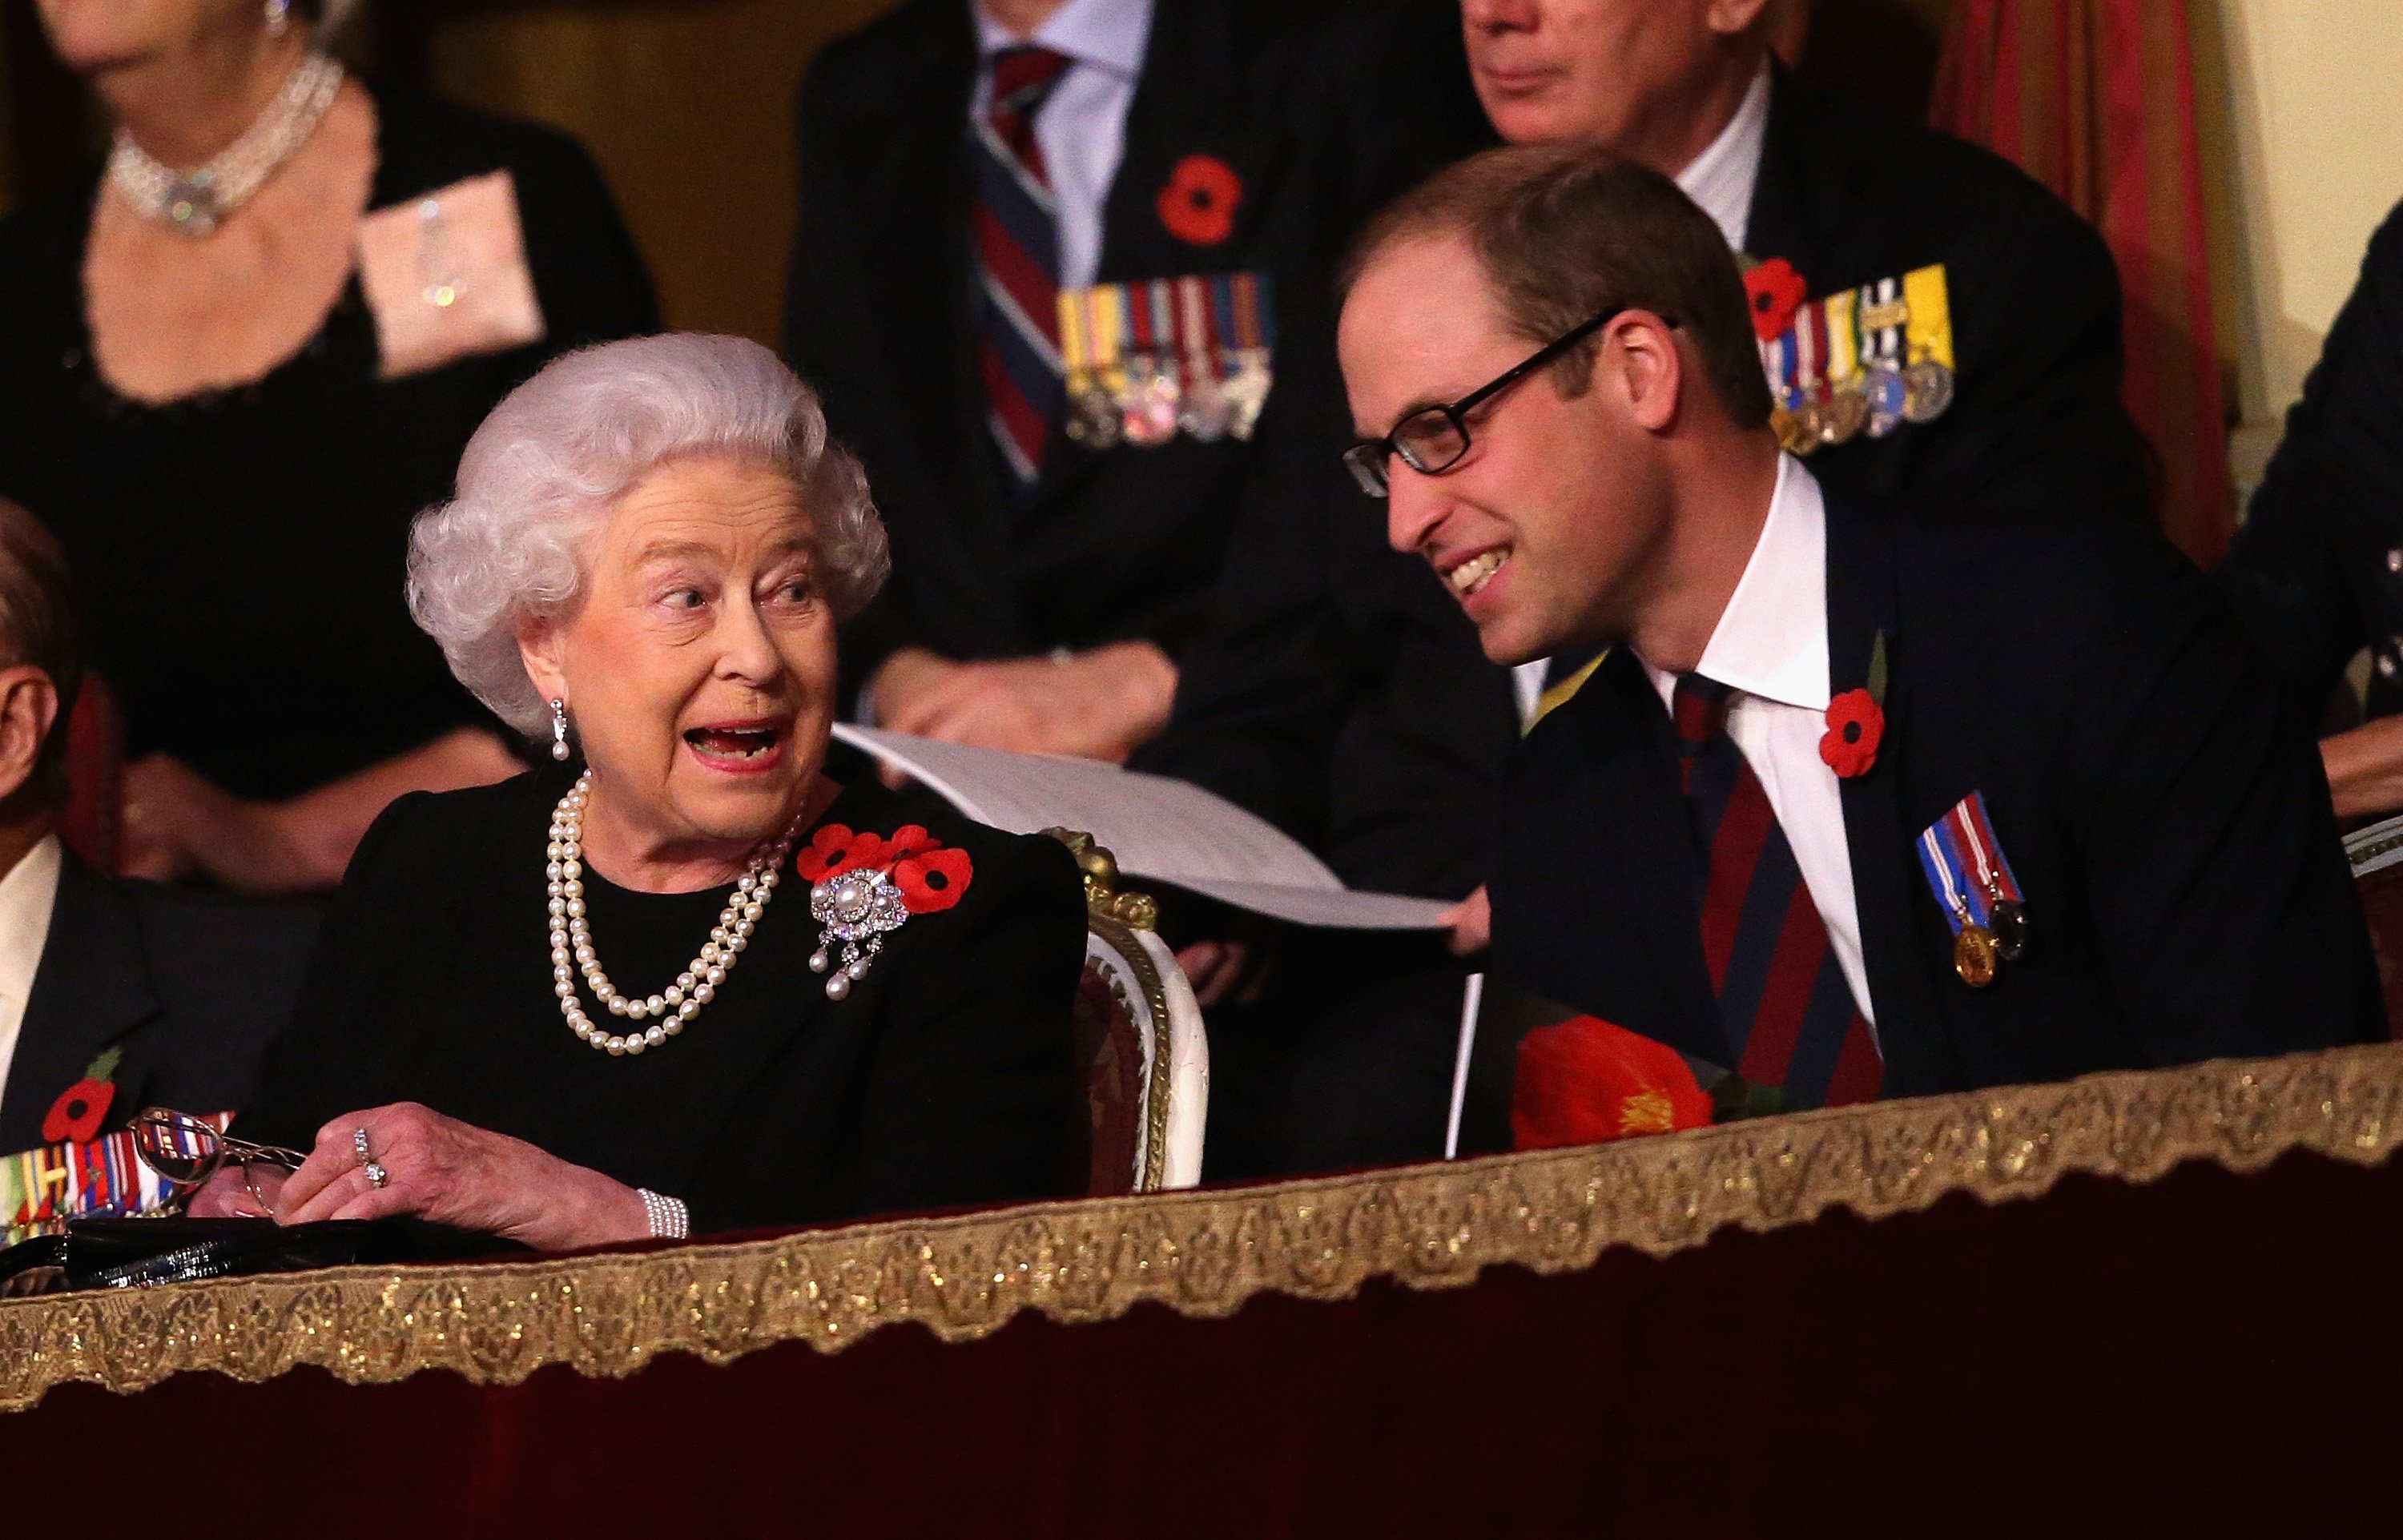 Queen Elizabeth II and Prince William pictured in the Royal Box at the Royal Albert Hall during the Annual Festival of Remembrance on November 7, 2015 in London, England | Source: Getty Images